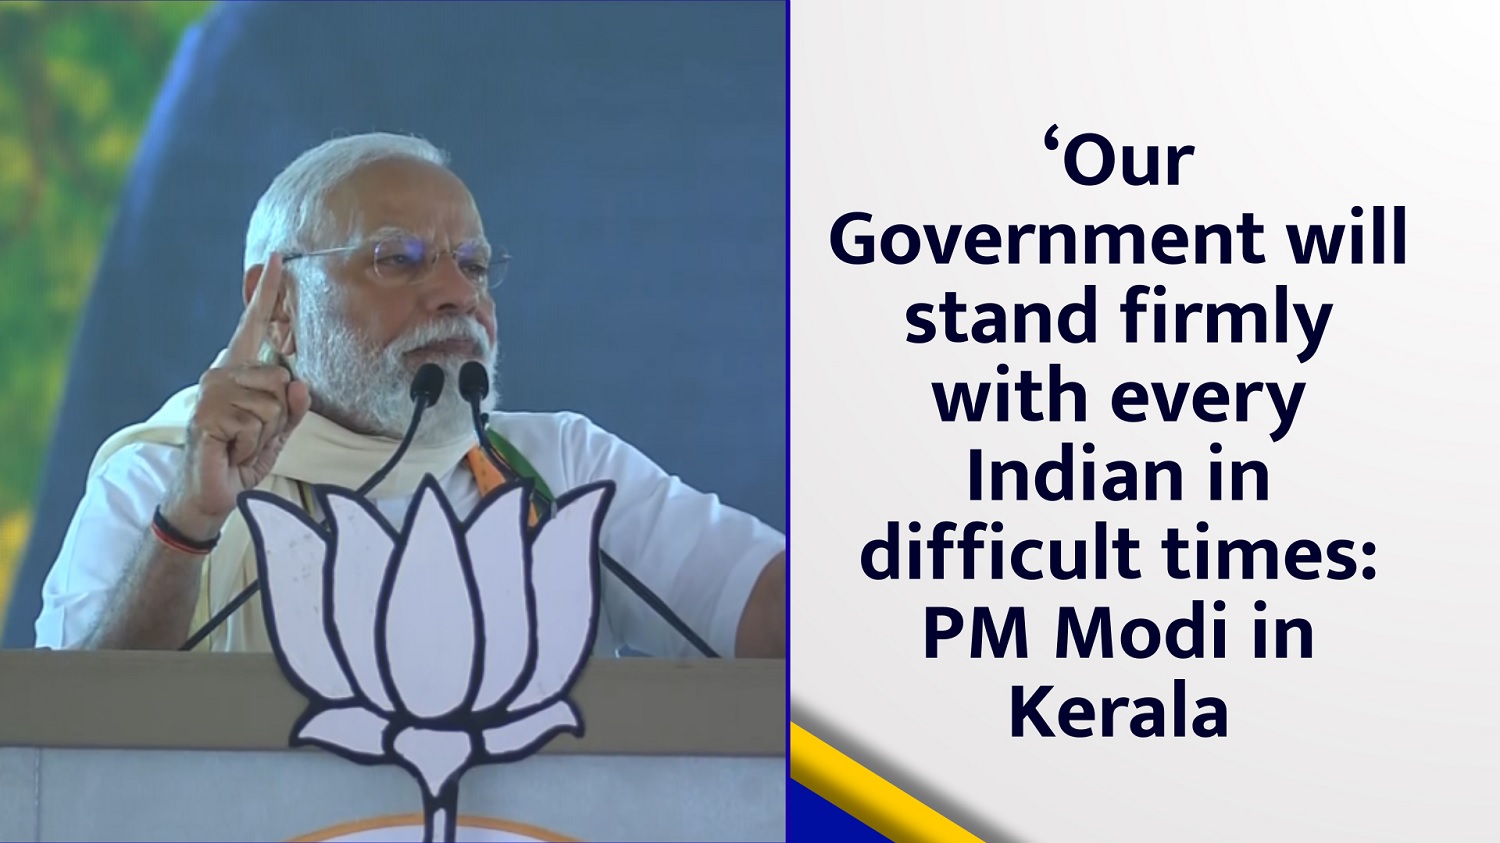 `Our Government will stand firmly with every Indian in difficult times PM Narendra Modi in Kerala